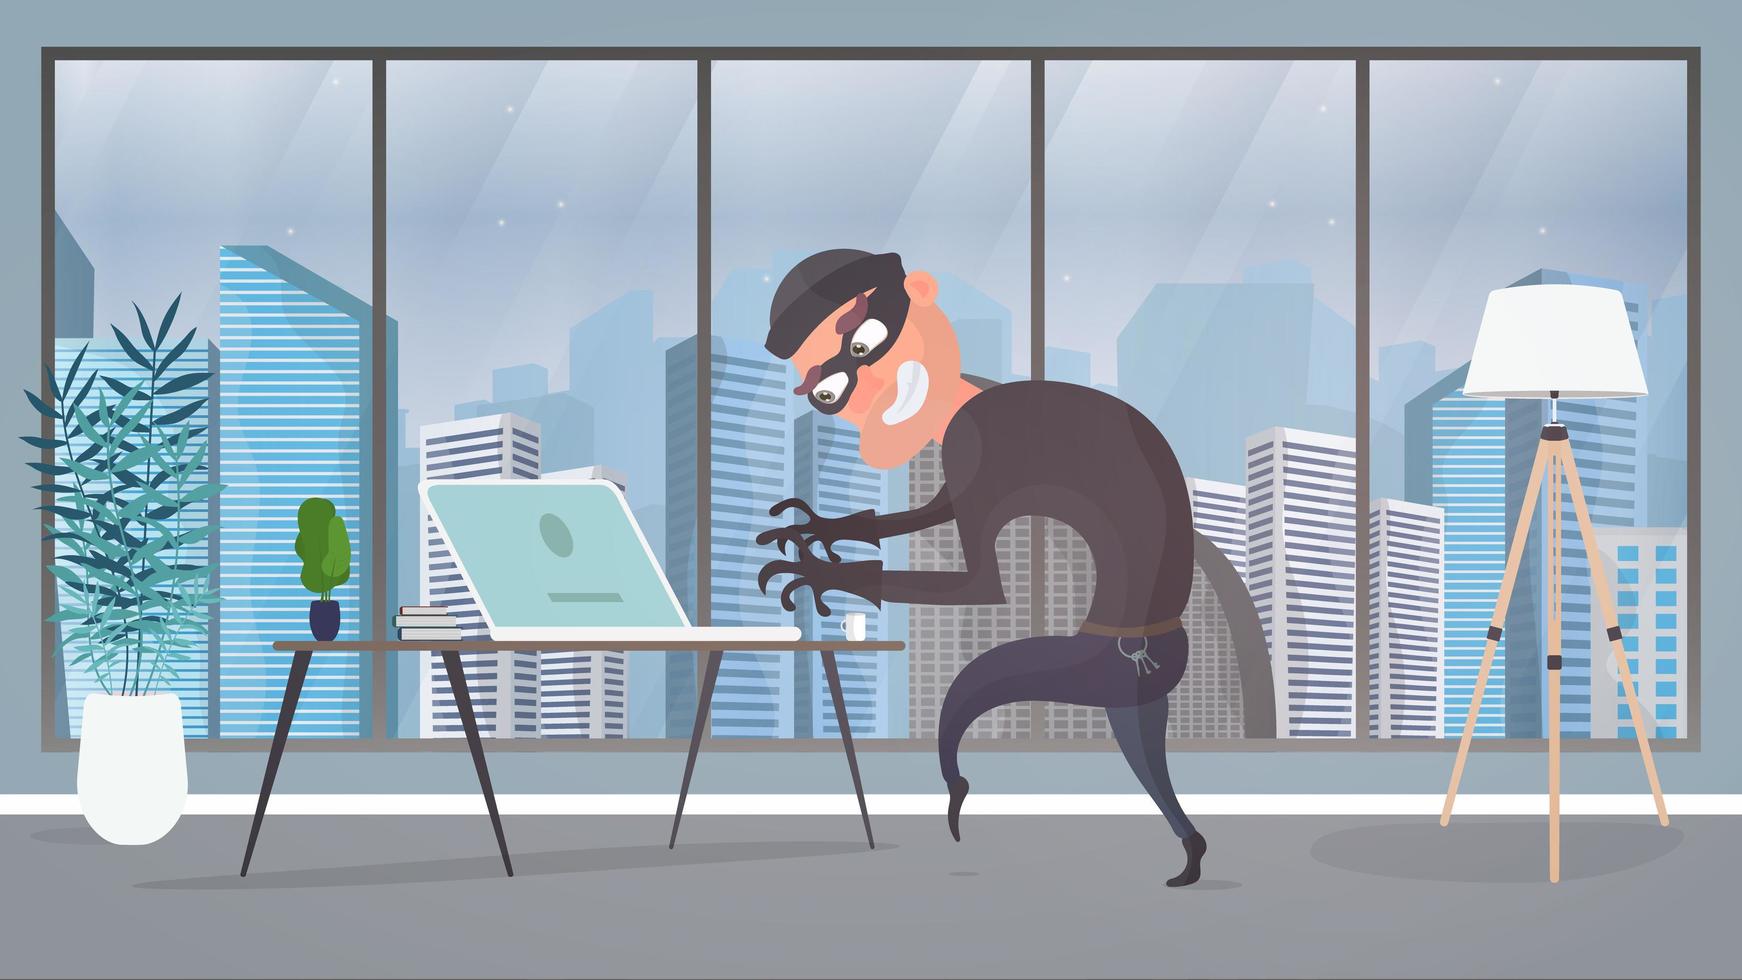 Thief in the office. A robber steals data from a laptop. Security concept. The robber robbed the office. Flat style vector illustration.